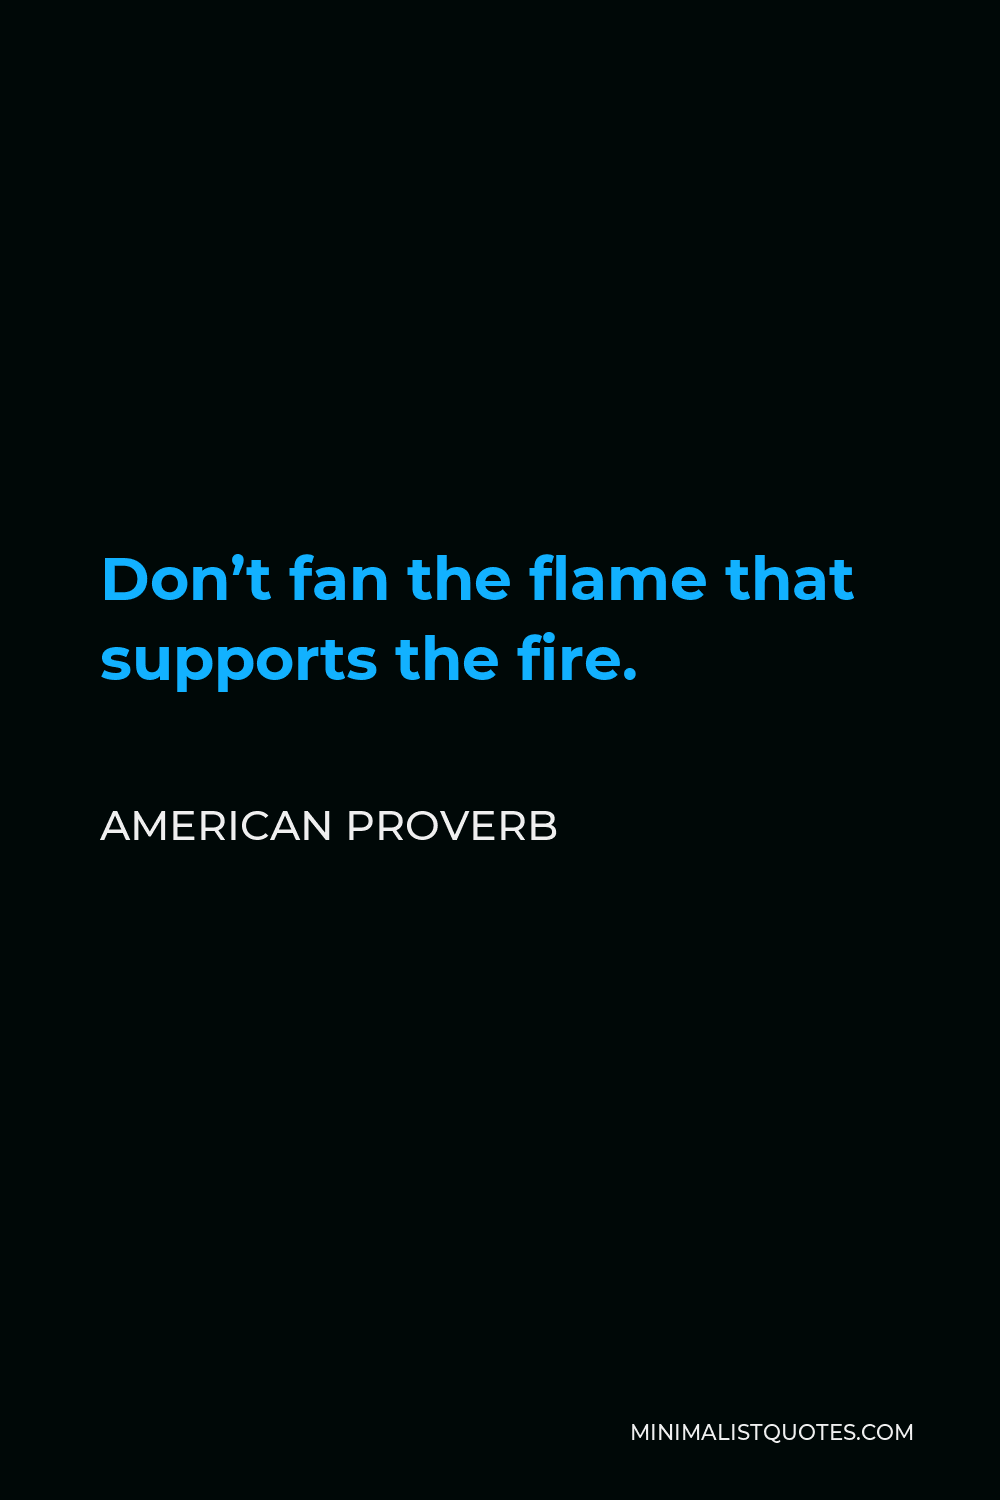 American Proverb Quote - Don’t fan the flame that supports the fire.